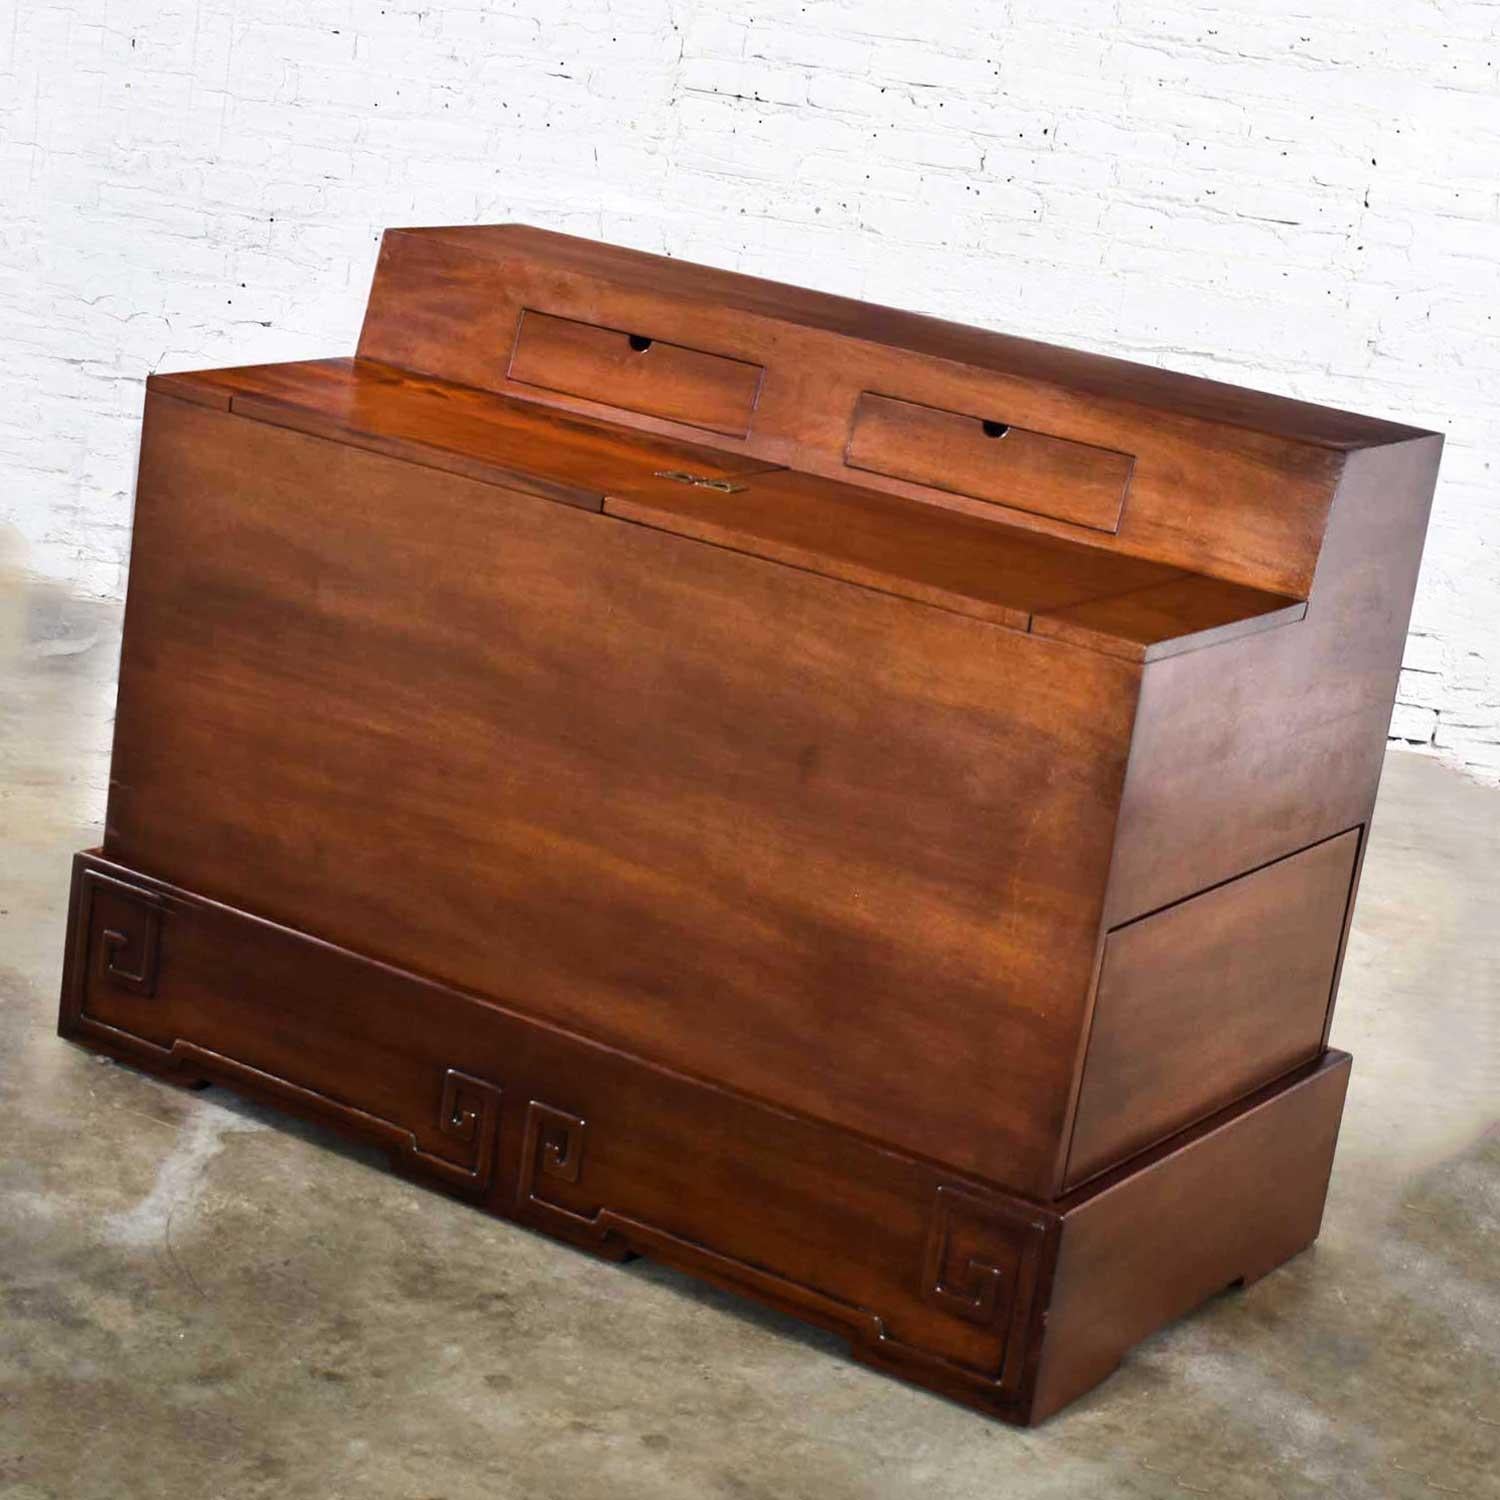 Wonderful Art Deco style entry desk or bar by IMA S.A. Bogota, Colombia comprised of mahogany, mahogany veneer, laminate, brass hinges, and brass ring pulls. Gorgeous condition with wear as you would expect with a vintage piece but no outstanding